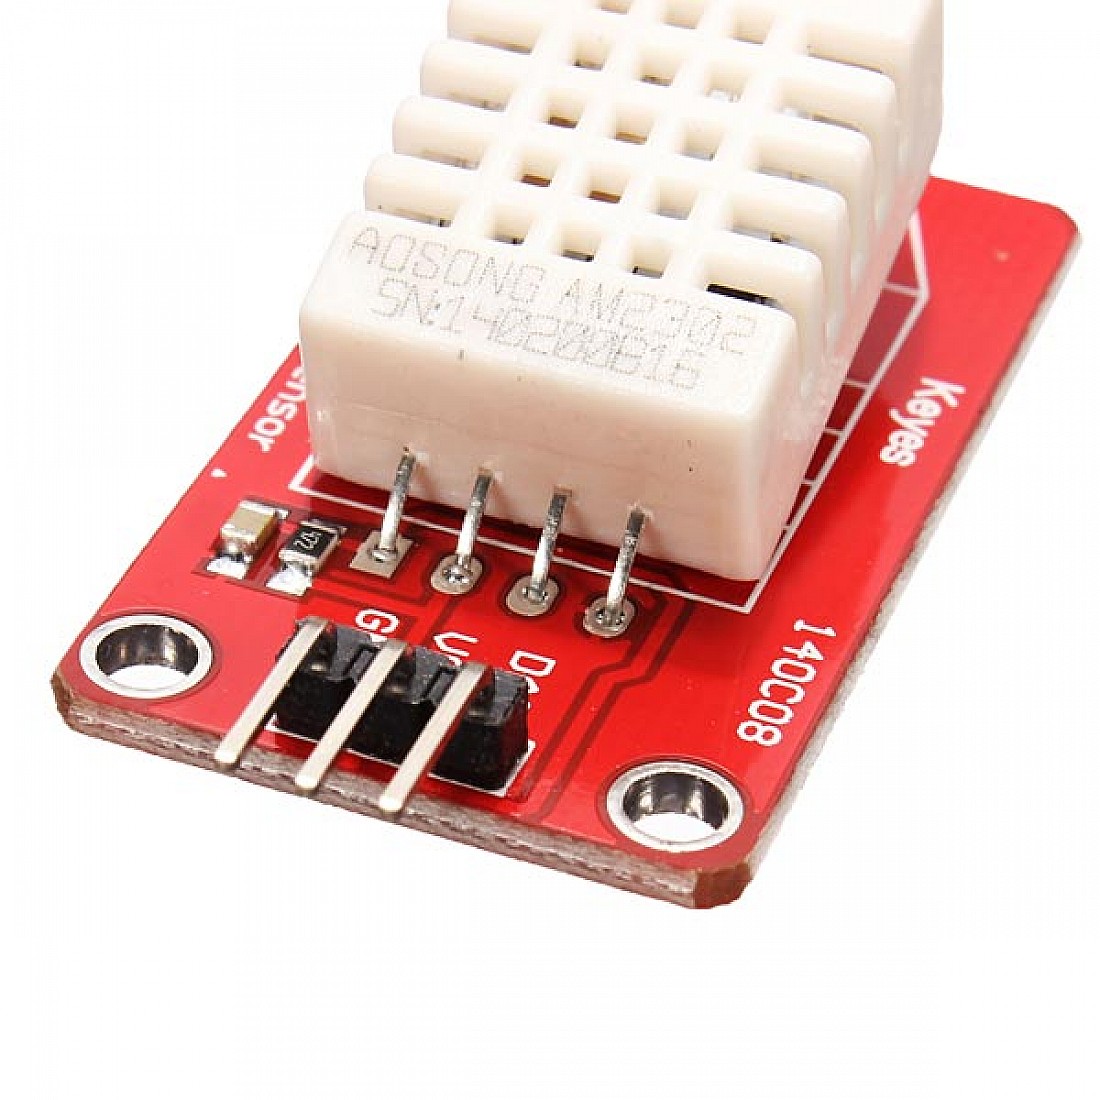 Am2302 Dht22 Temperature And Humidity Sensor Module For Arduino Scm 7671